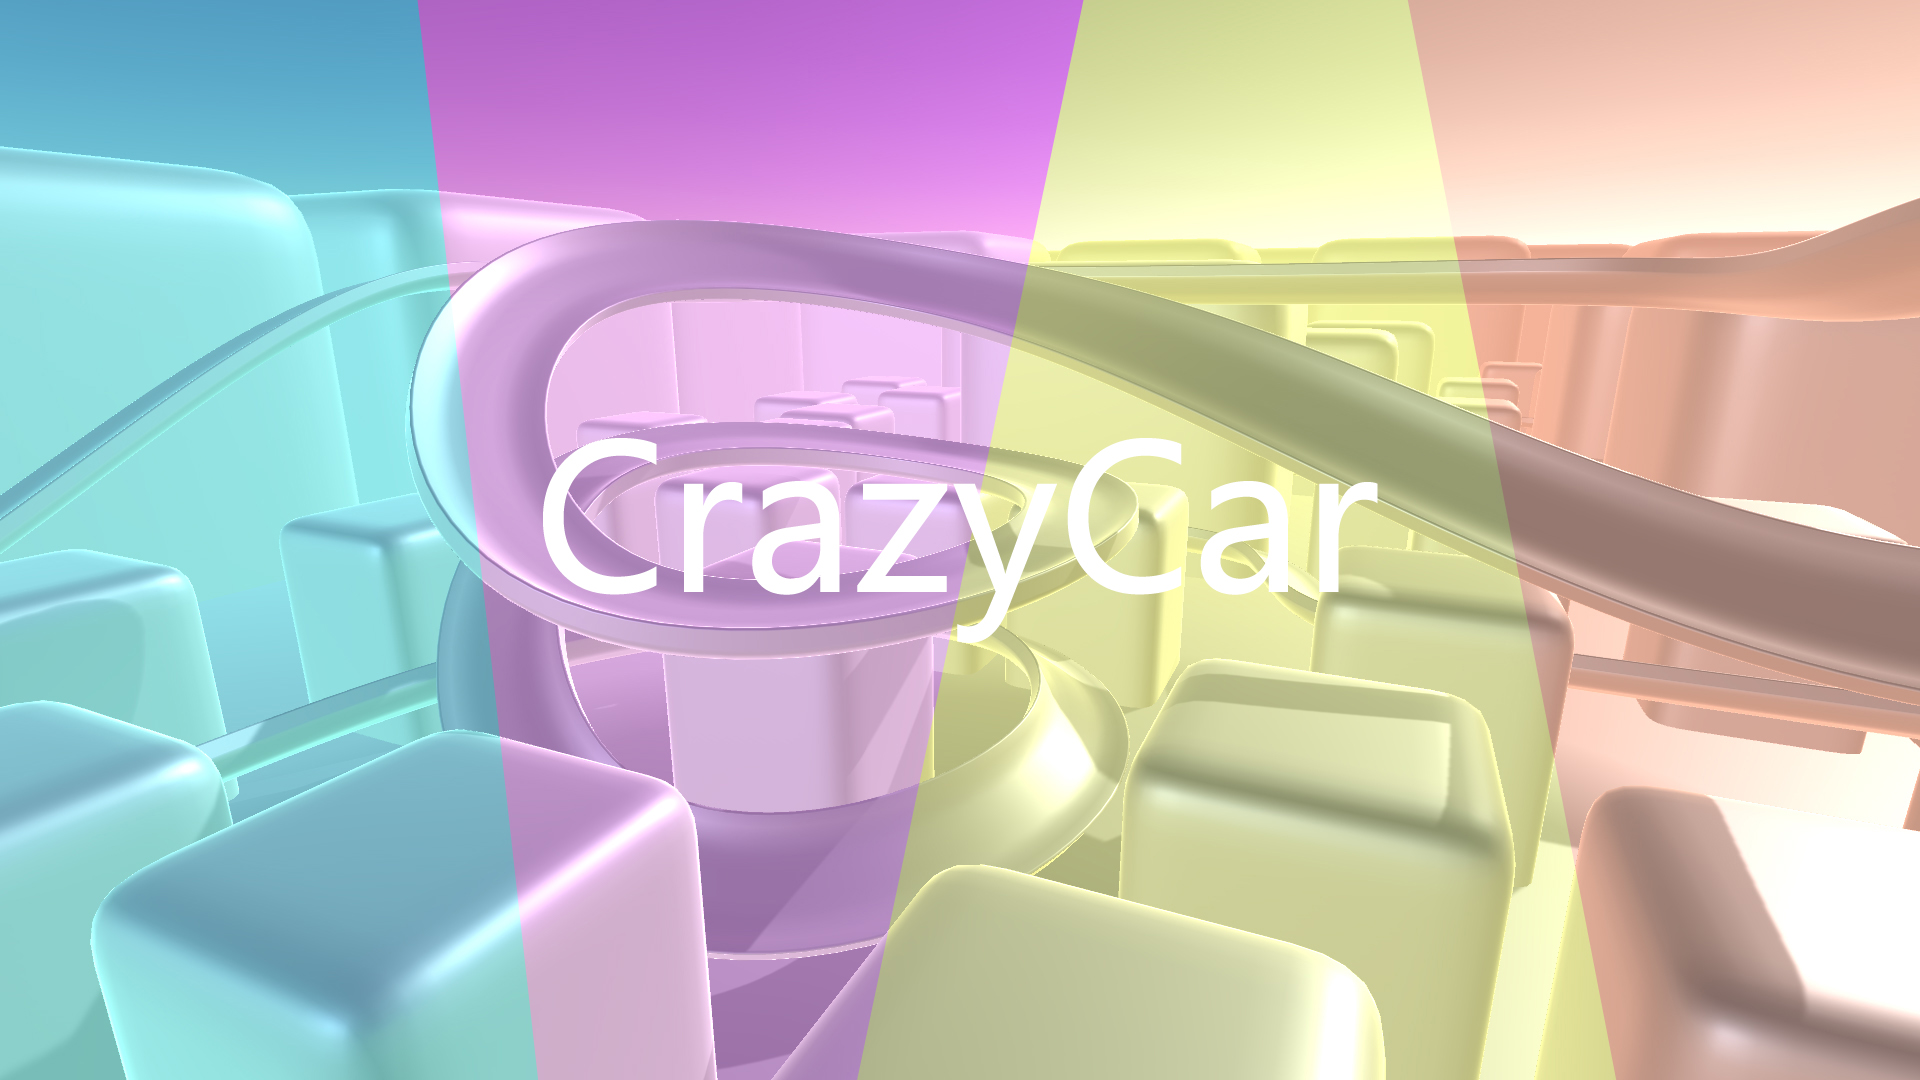 CrazyCar - Images and Music screenshot